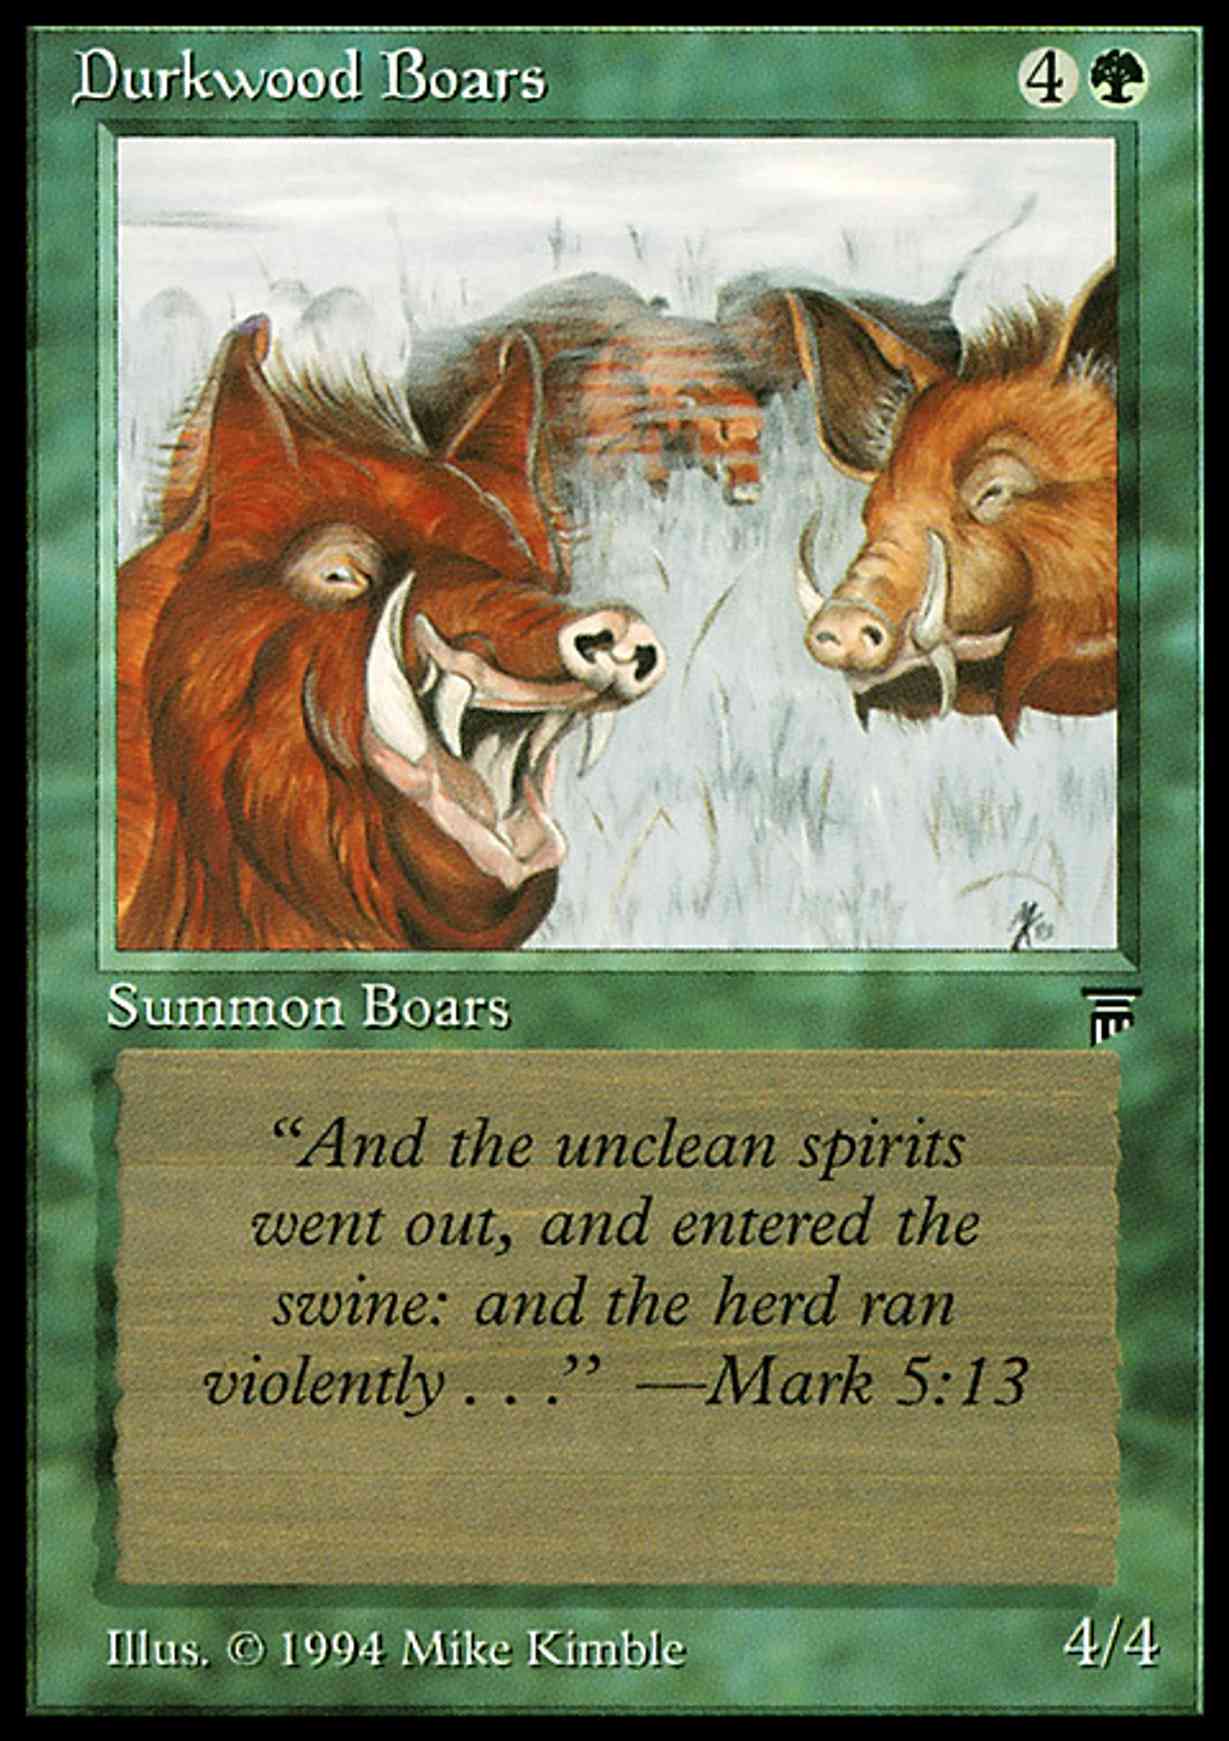 Durkwood Boars magic card front